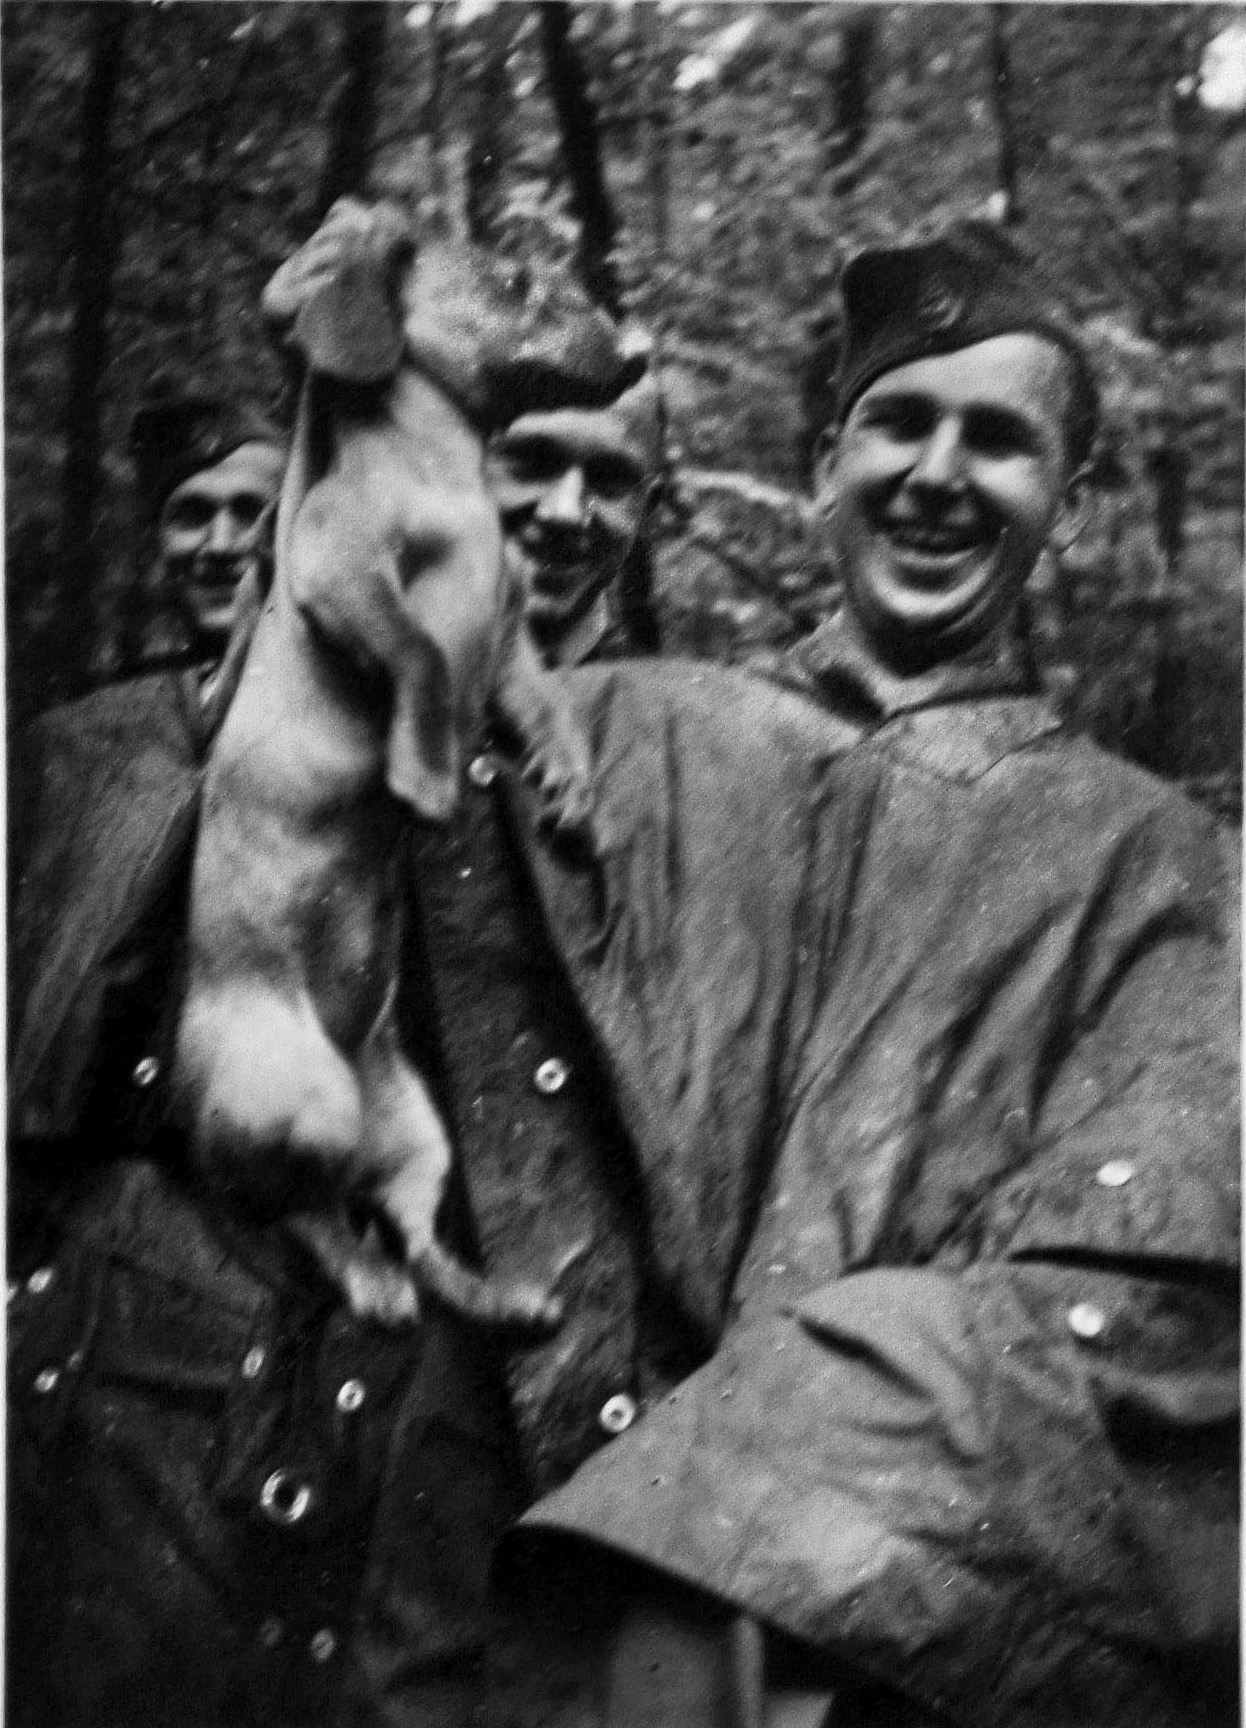 A soldier in a rain cape and his comrades enjoy a photo op with a Daschund who might not share their enthusiasm. Mascots were often found with field units, the animals serving to bring some emotional warmth to the brutal work at hand.